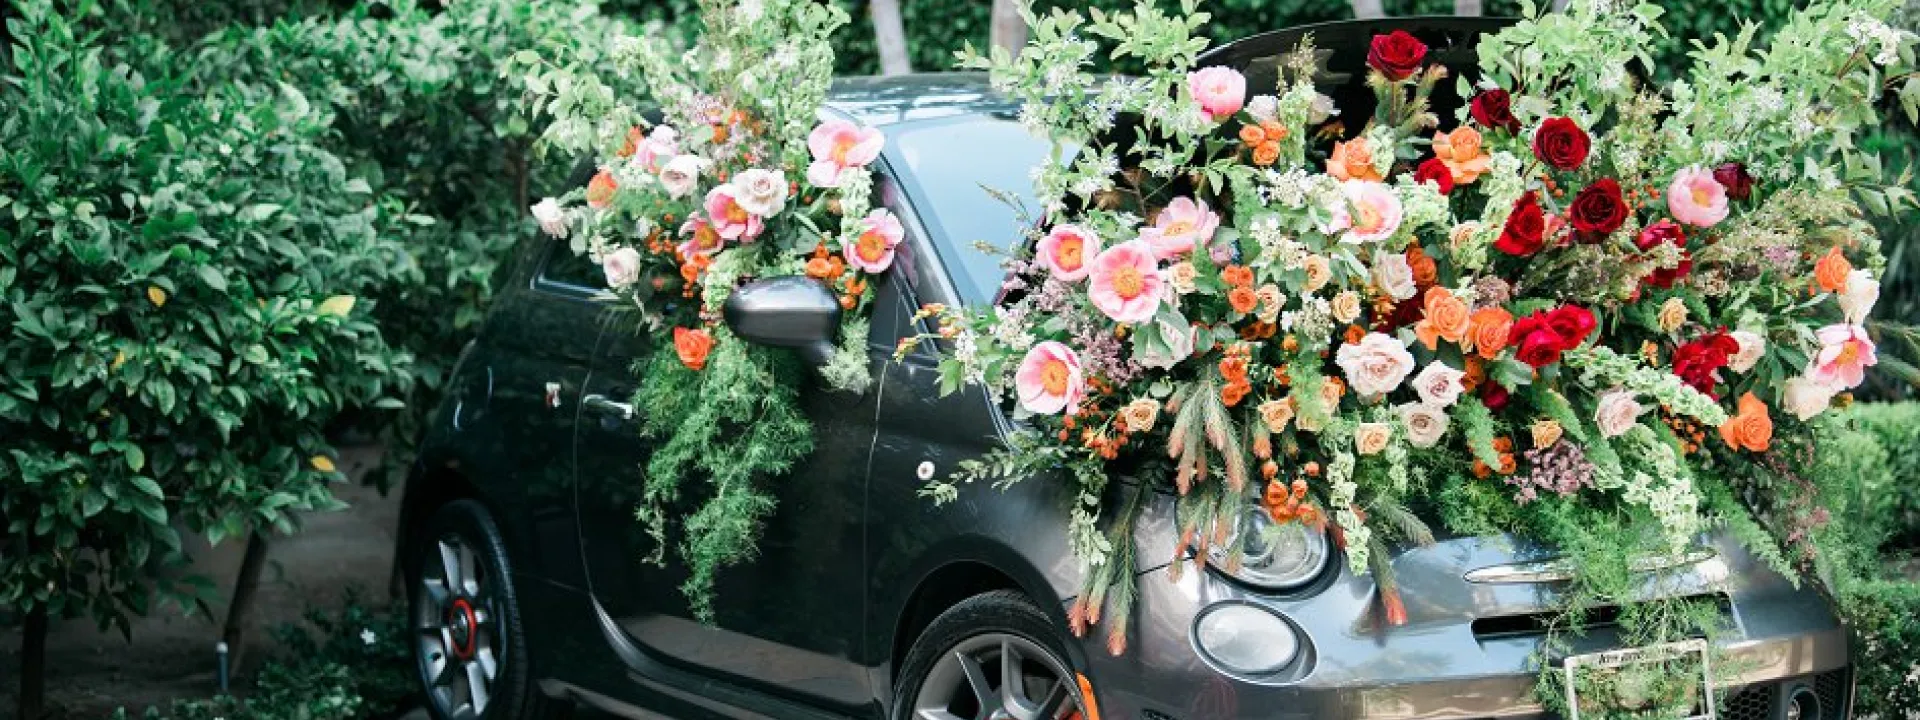 cwd best of 2018, fiat car, floral inspiration, wedding inspiration, california wedding, california wedding day best of 2018